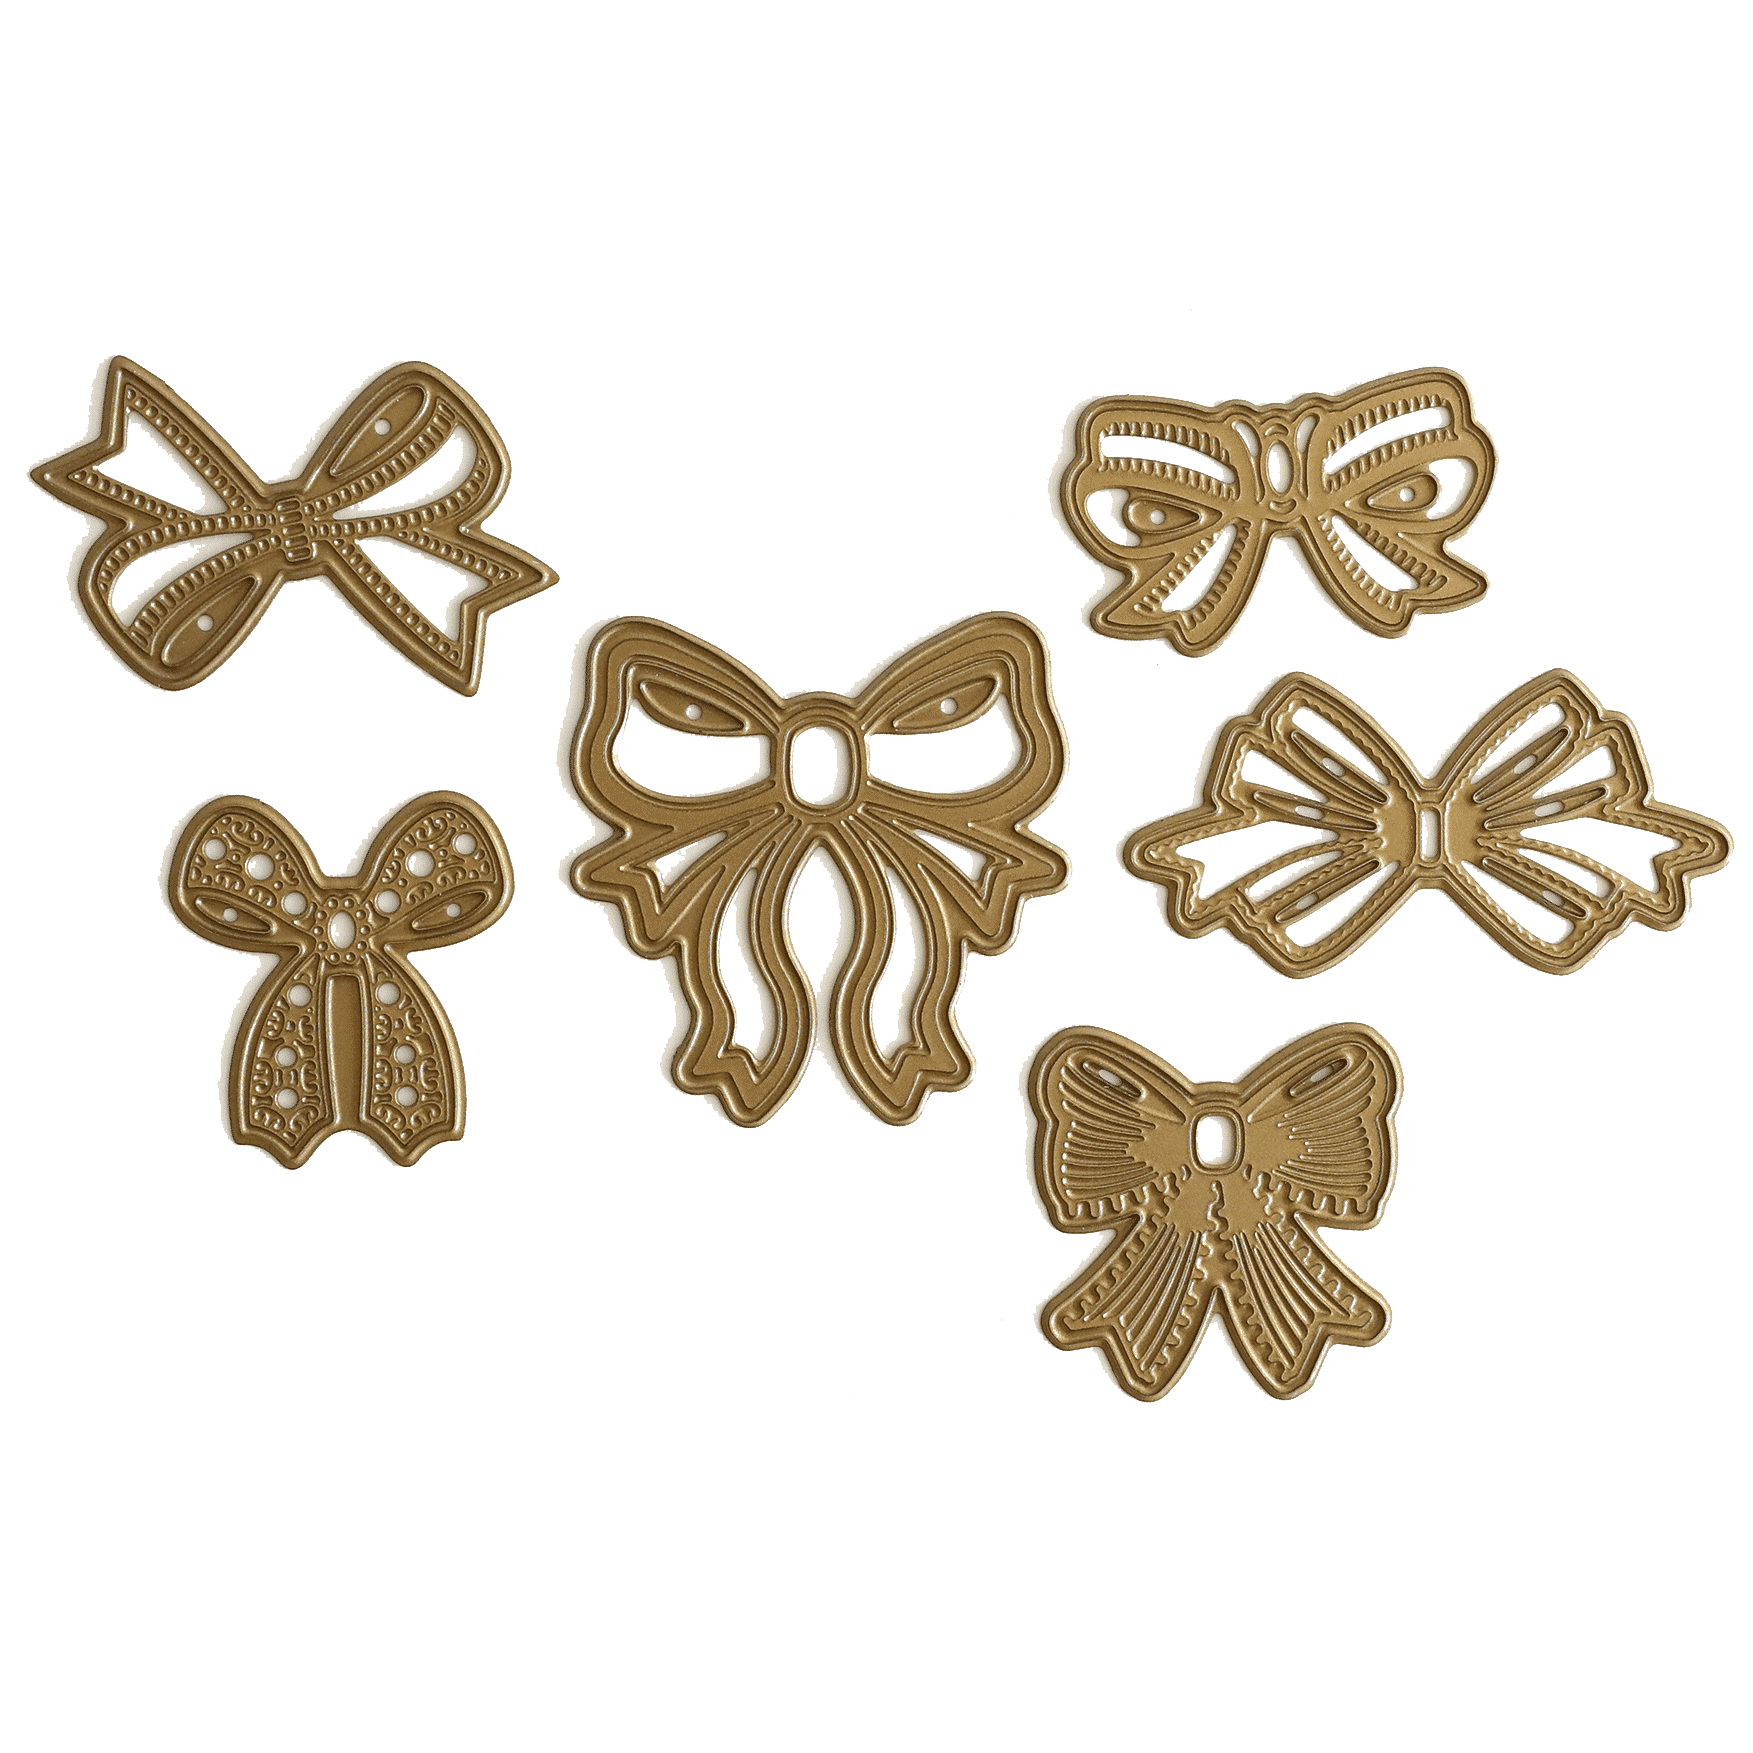 a set of four decorative bows on a green background.